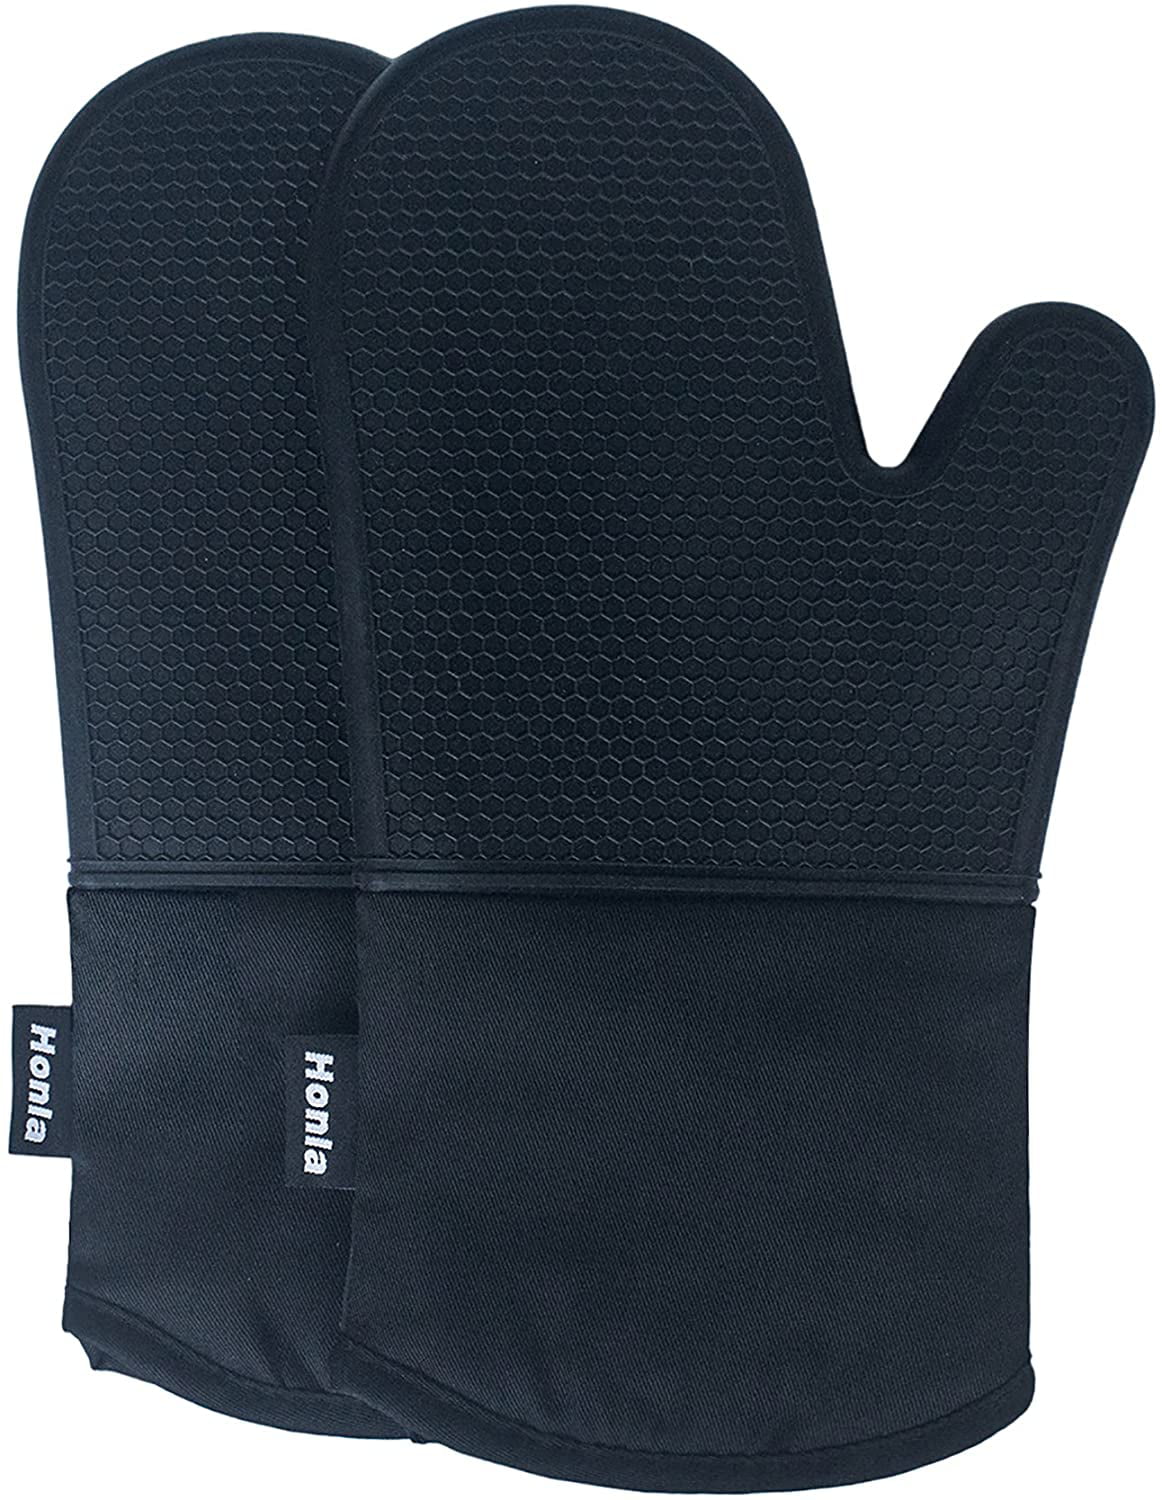 Protection up to 500°F Cooking Frying Heat Resistant Oven Gloves BBQ Baking Silicon Kitchen Mitts for Grilling 1 Pair Broiling Black 